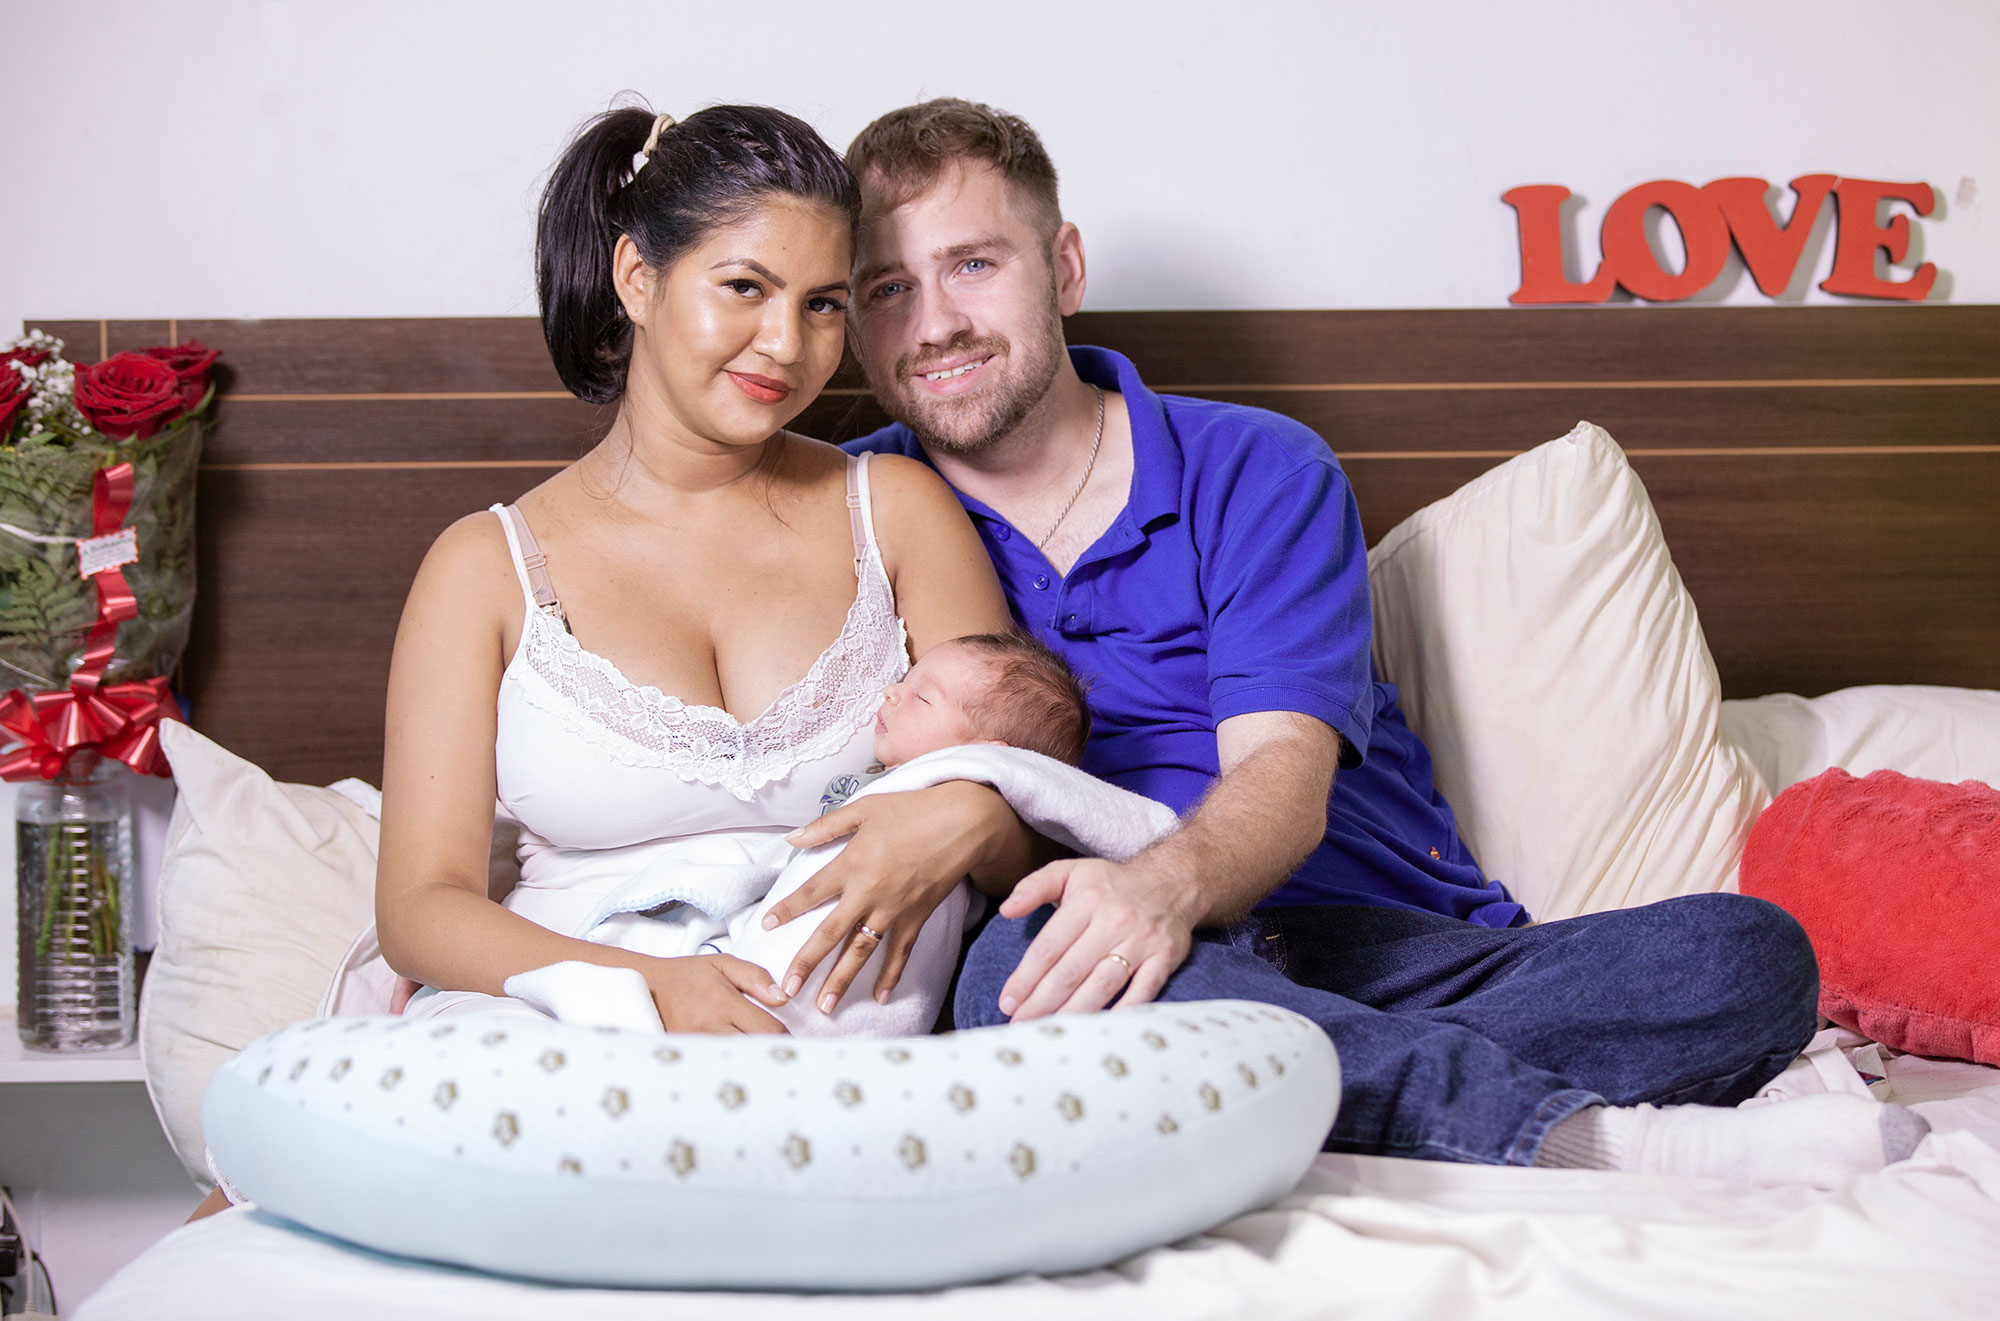 90 Day Fiance S Paul And Karine Staehle Welcome A Baby Boy.